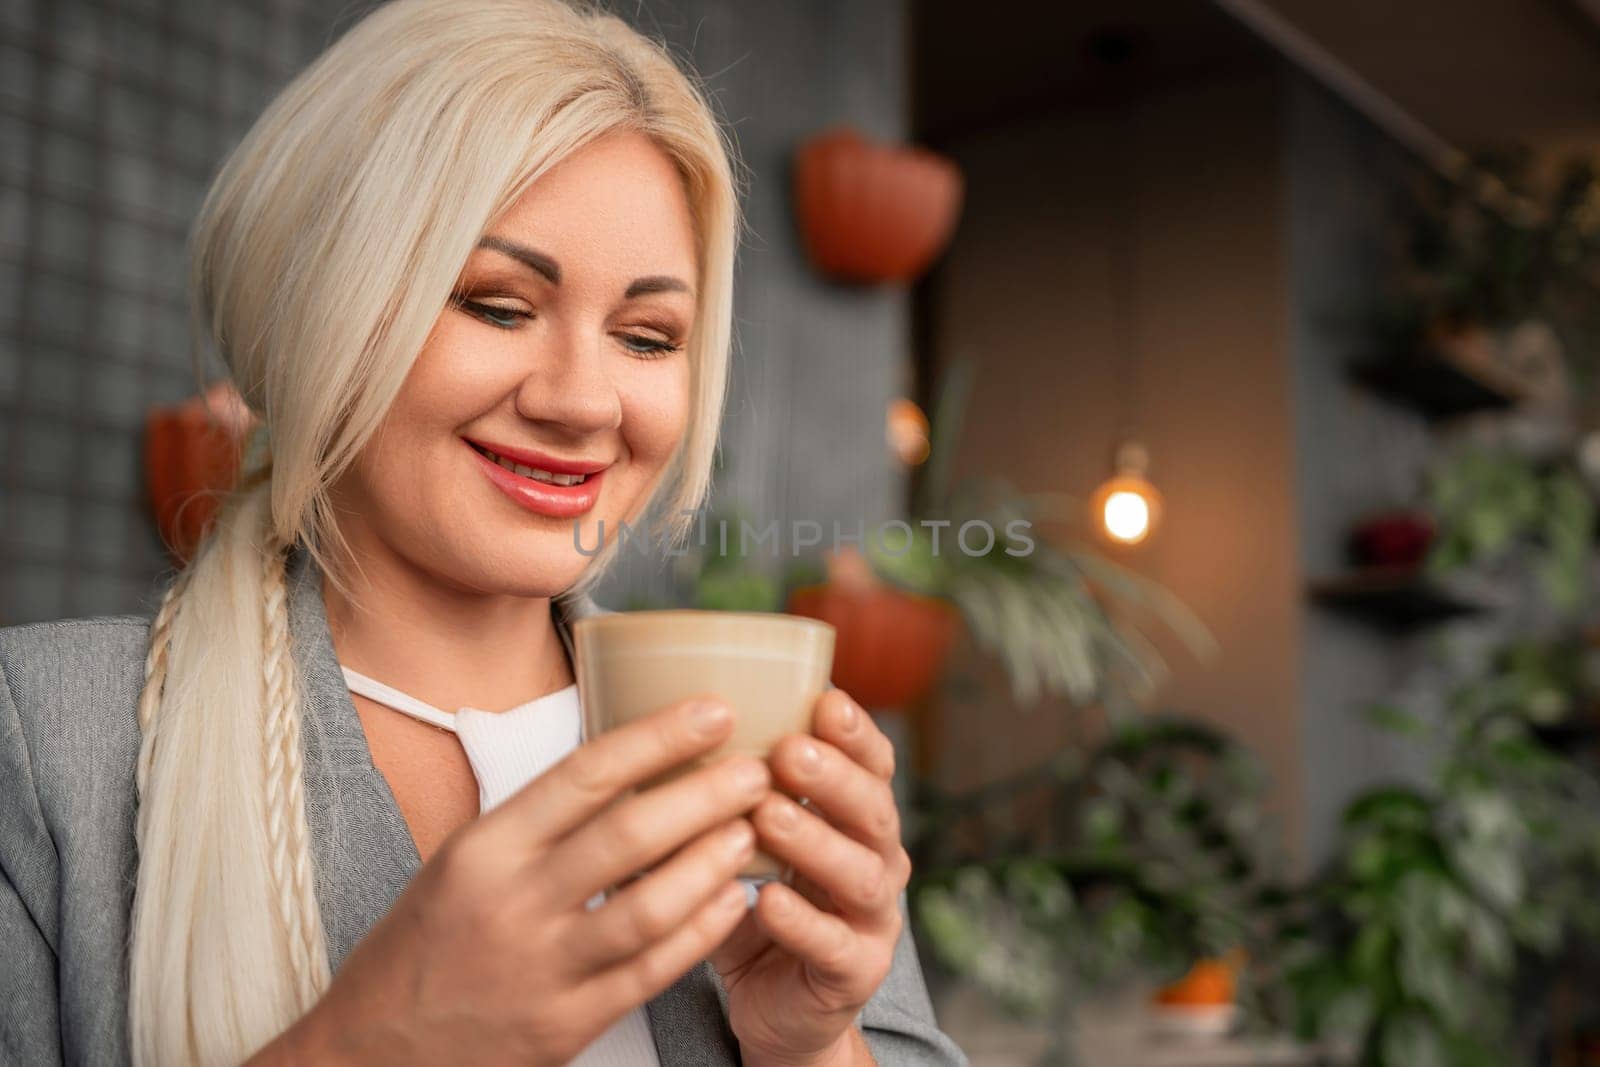 A blonde woman is holding a cup of coffee and smiling. The scene is set in a room with plants and a potted plant in the background